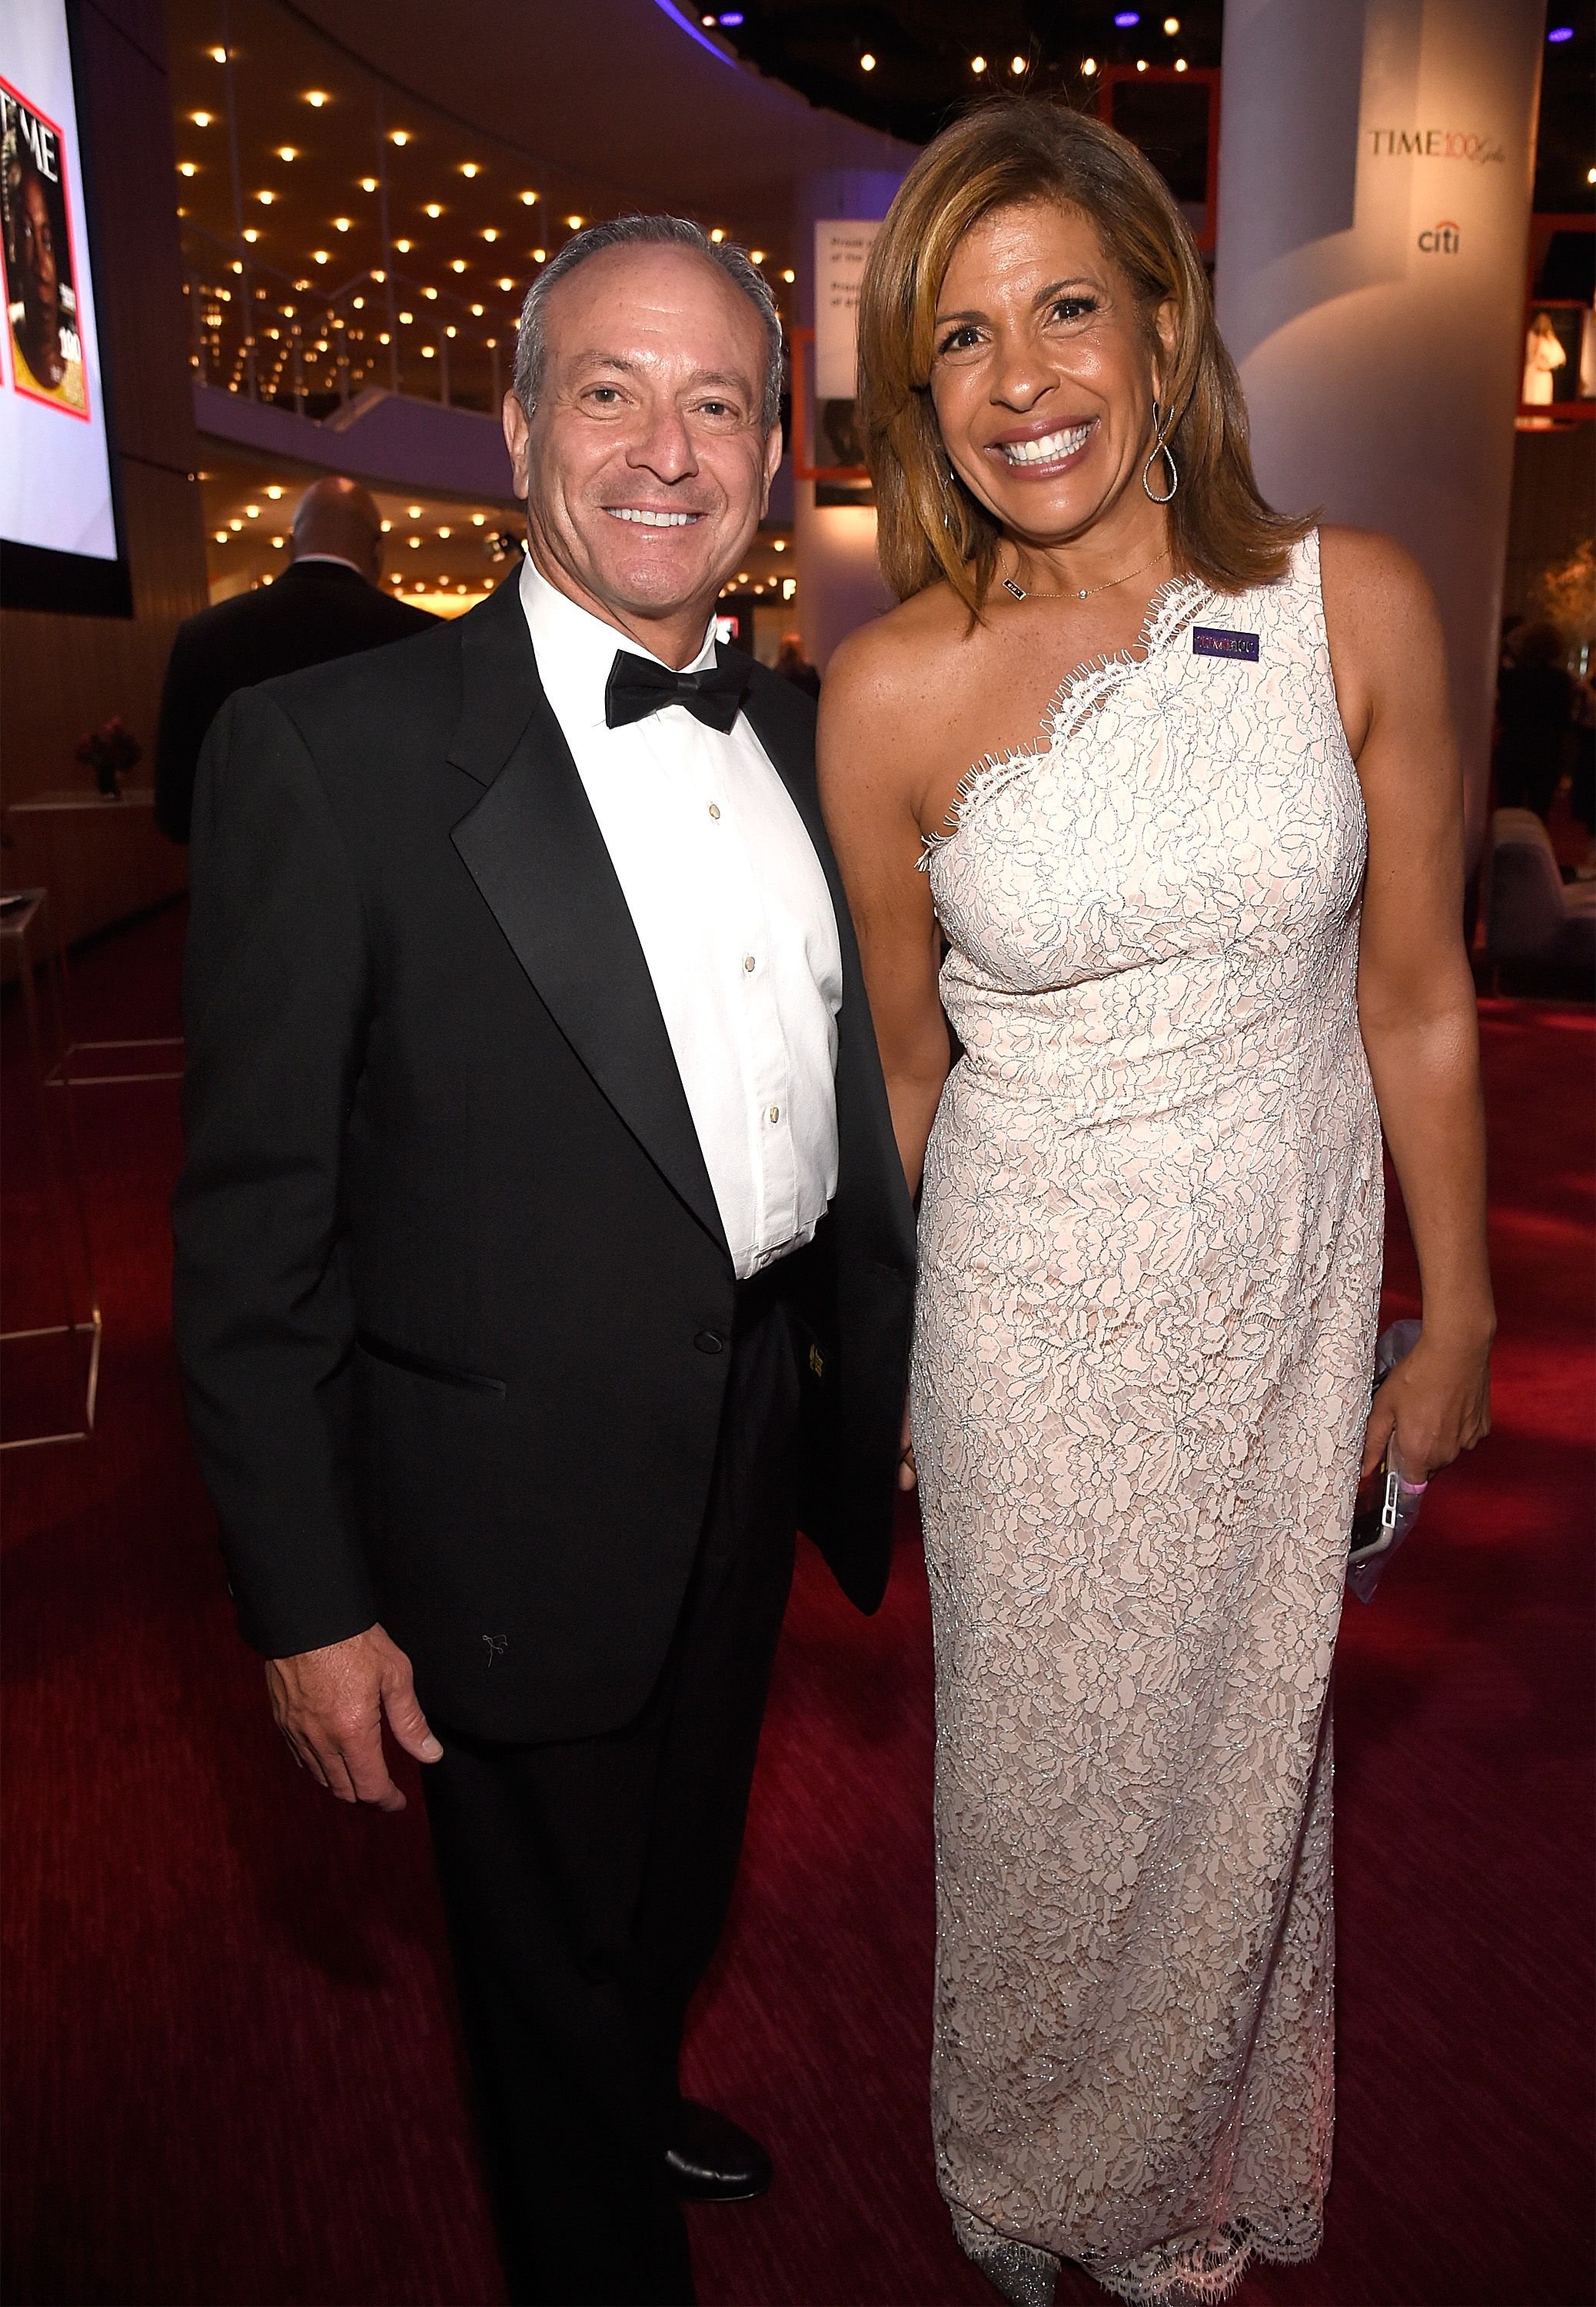 Joel Schiffman and Hoda Kotb at the 2018 Time 100 Gala at Jazz at Lincoln Center on April 24, 2018 | Photo: Getty Images